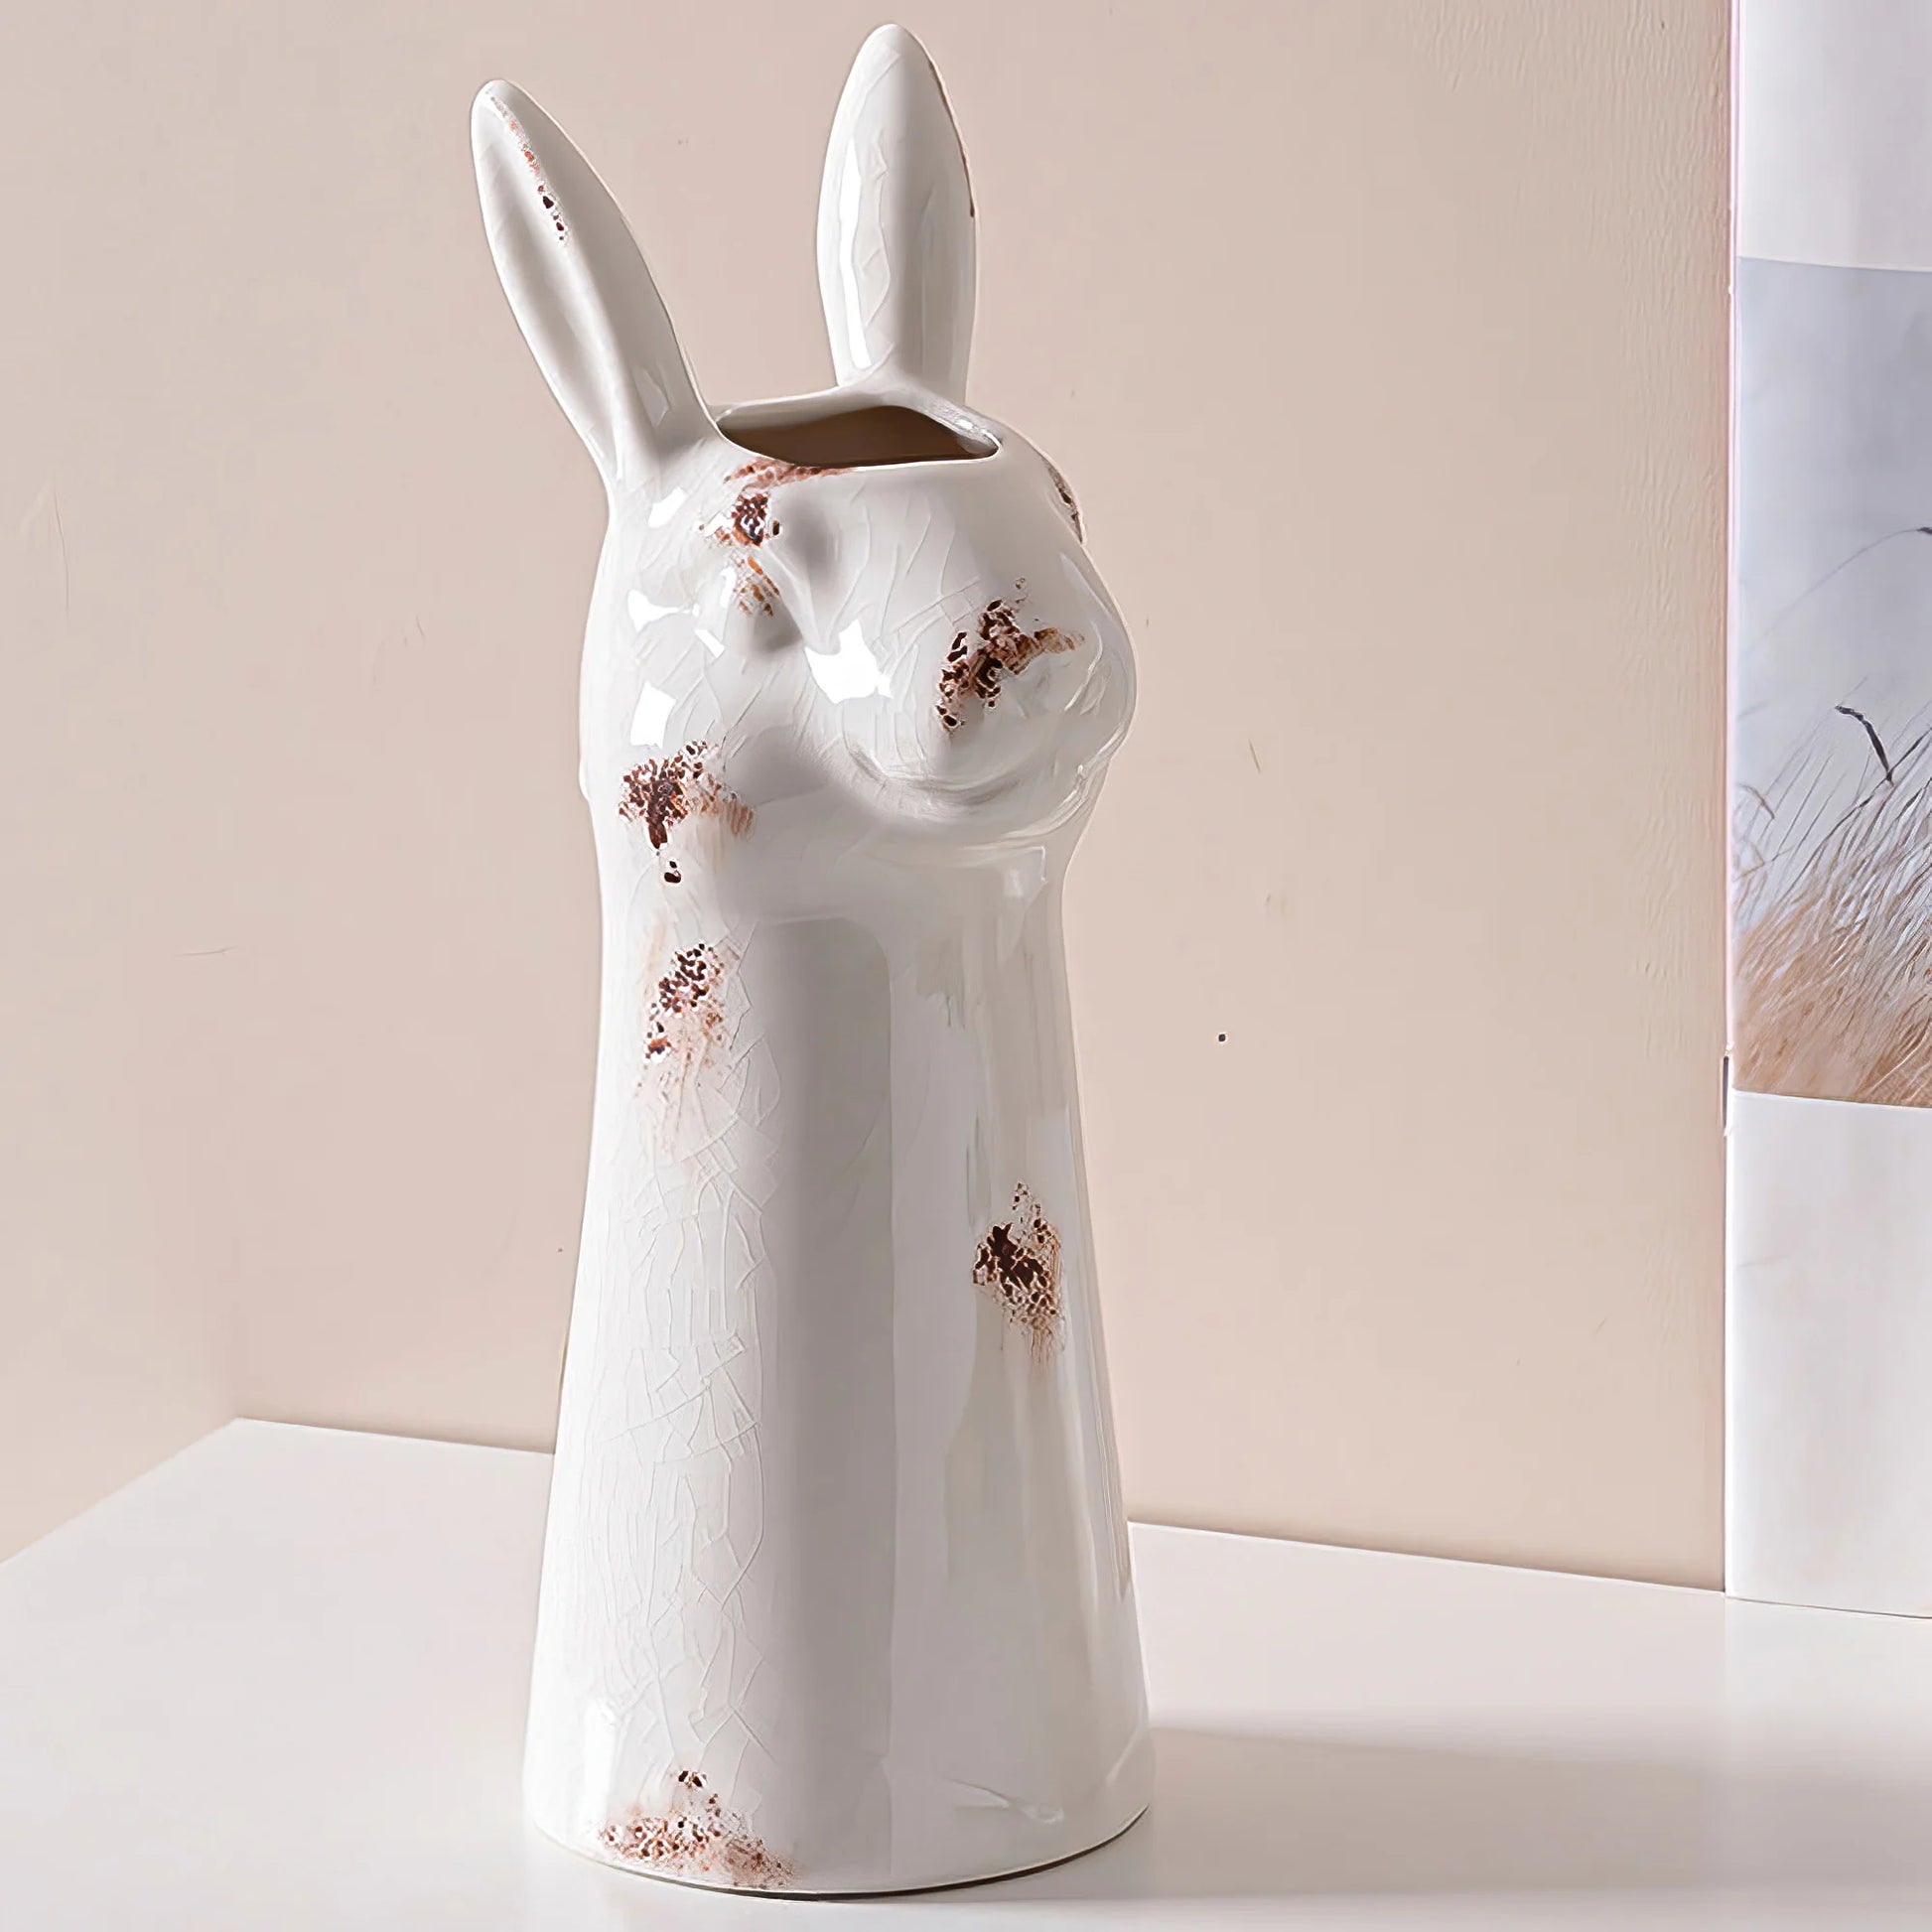 a white ceramic rabbit shaped vase sitting on a table